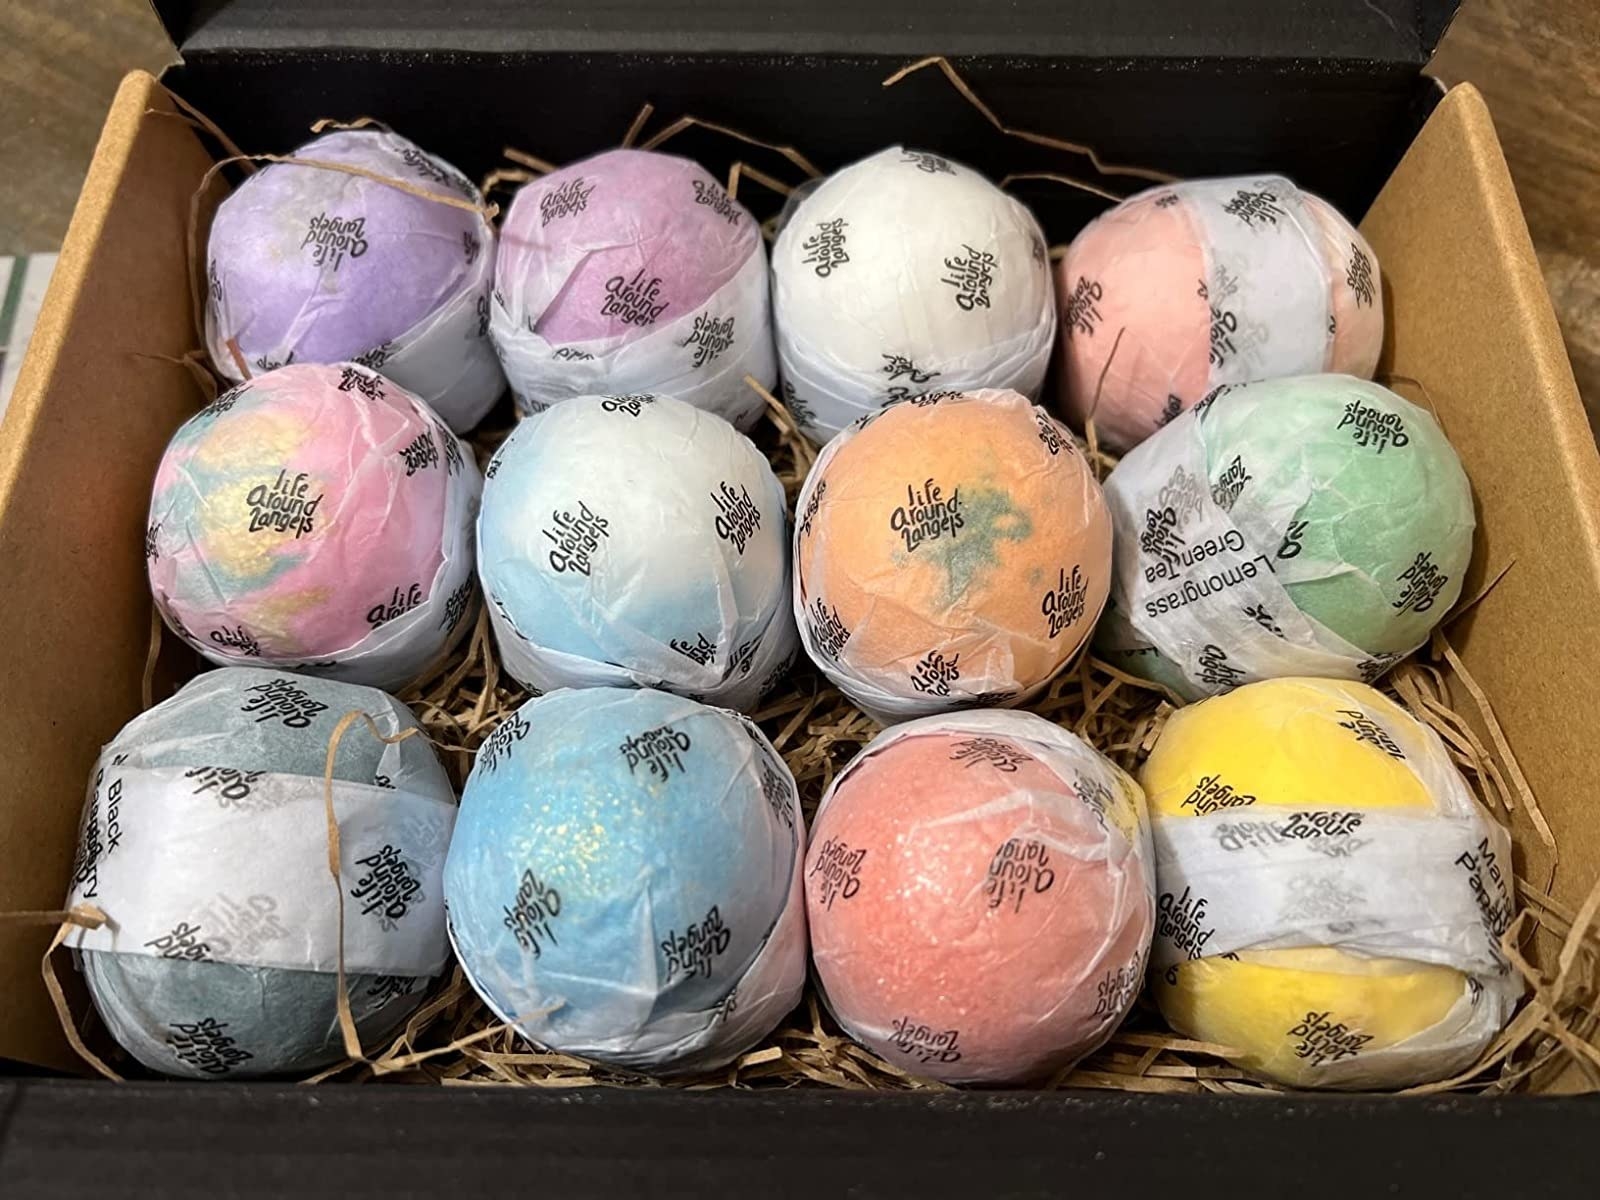 Reviewer image of the bath bombs